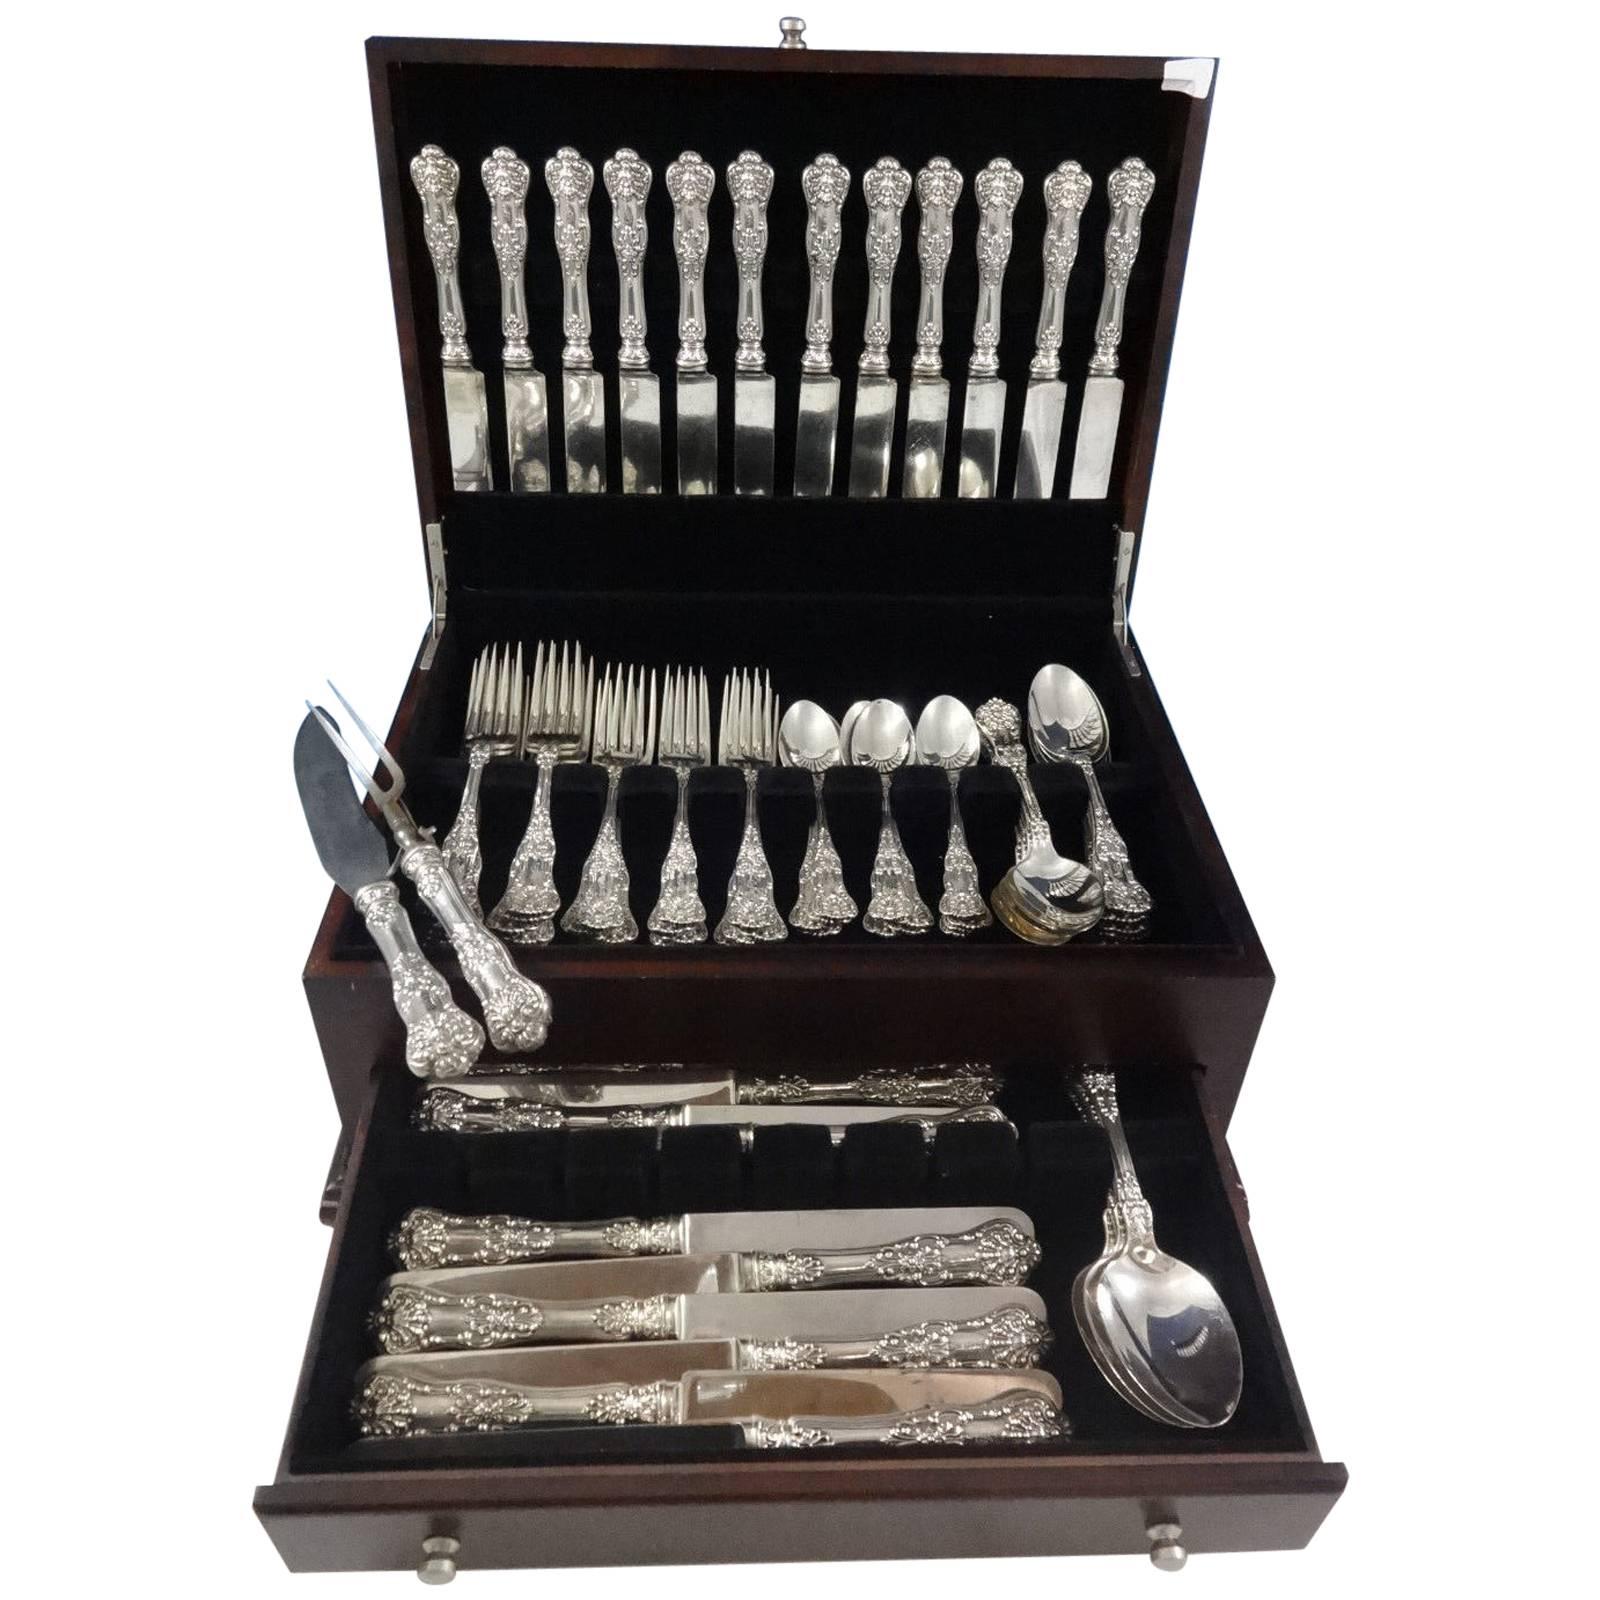 Beautiful New King by Dominick & Haff sterling silver dinner flatware set with classic shell motif of 80 pieces. This set includes:

12 dinner size knives with blunt silver plated blades, 10 1/8